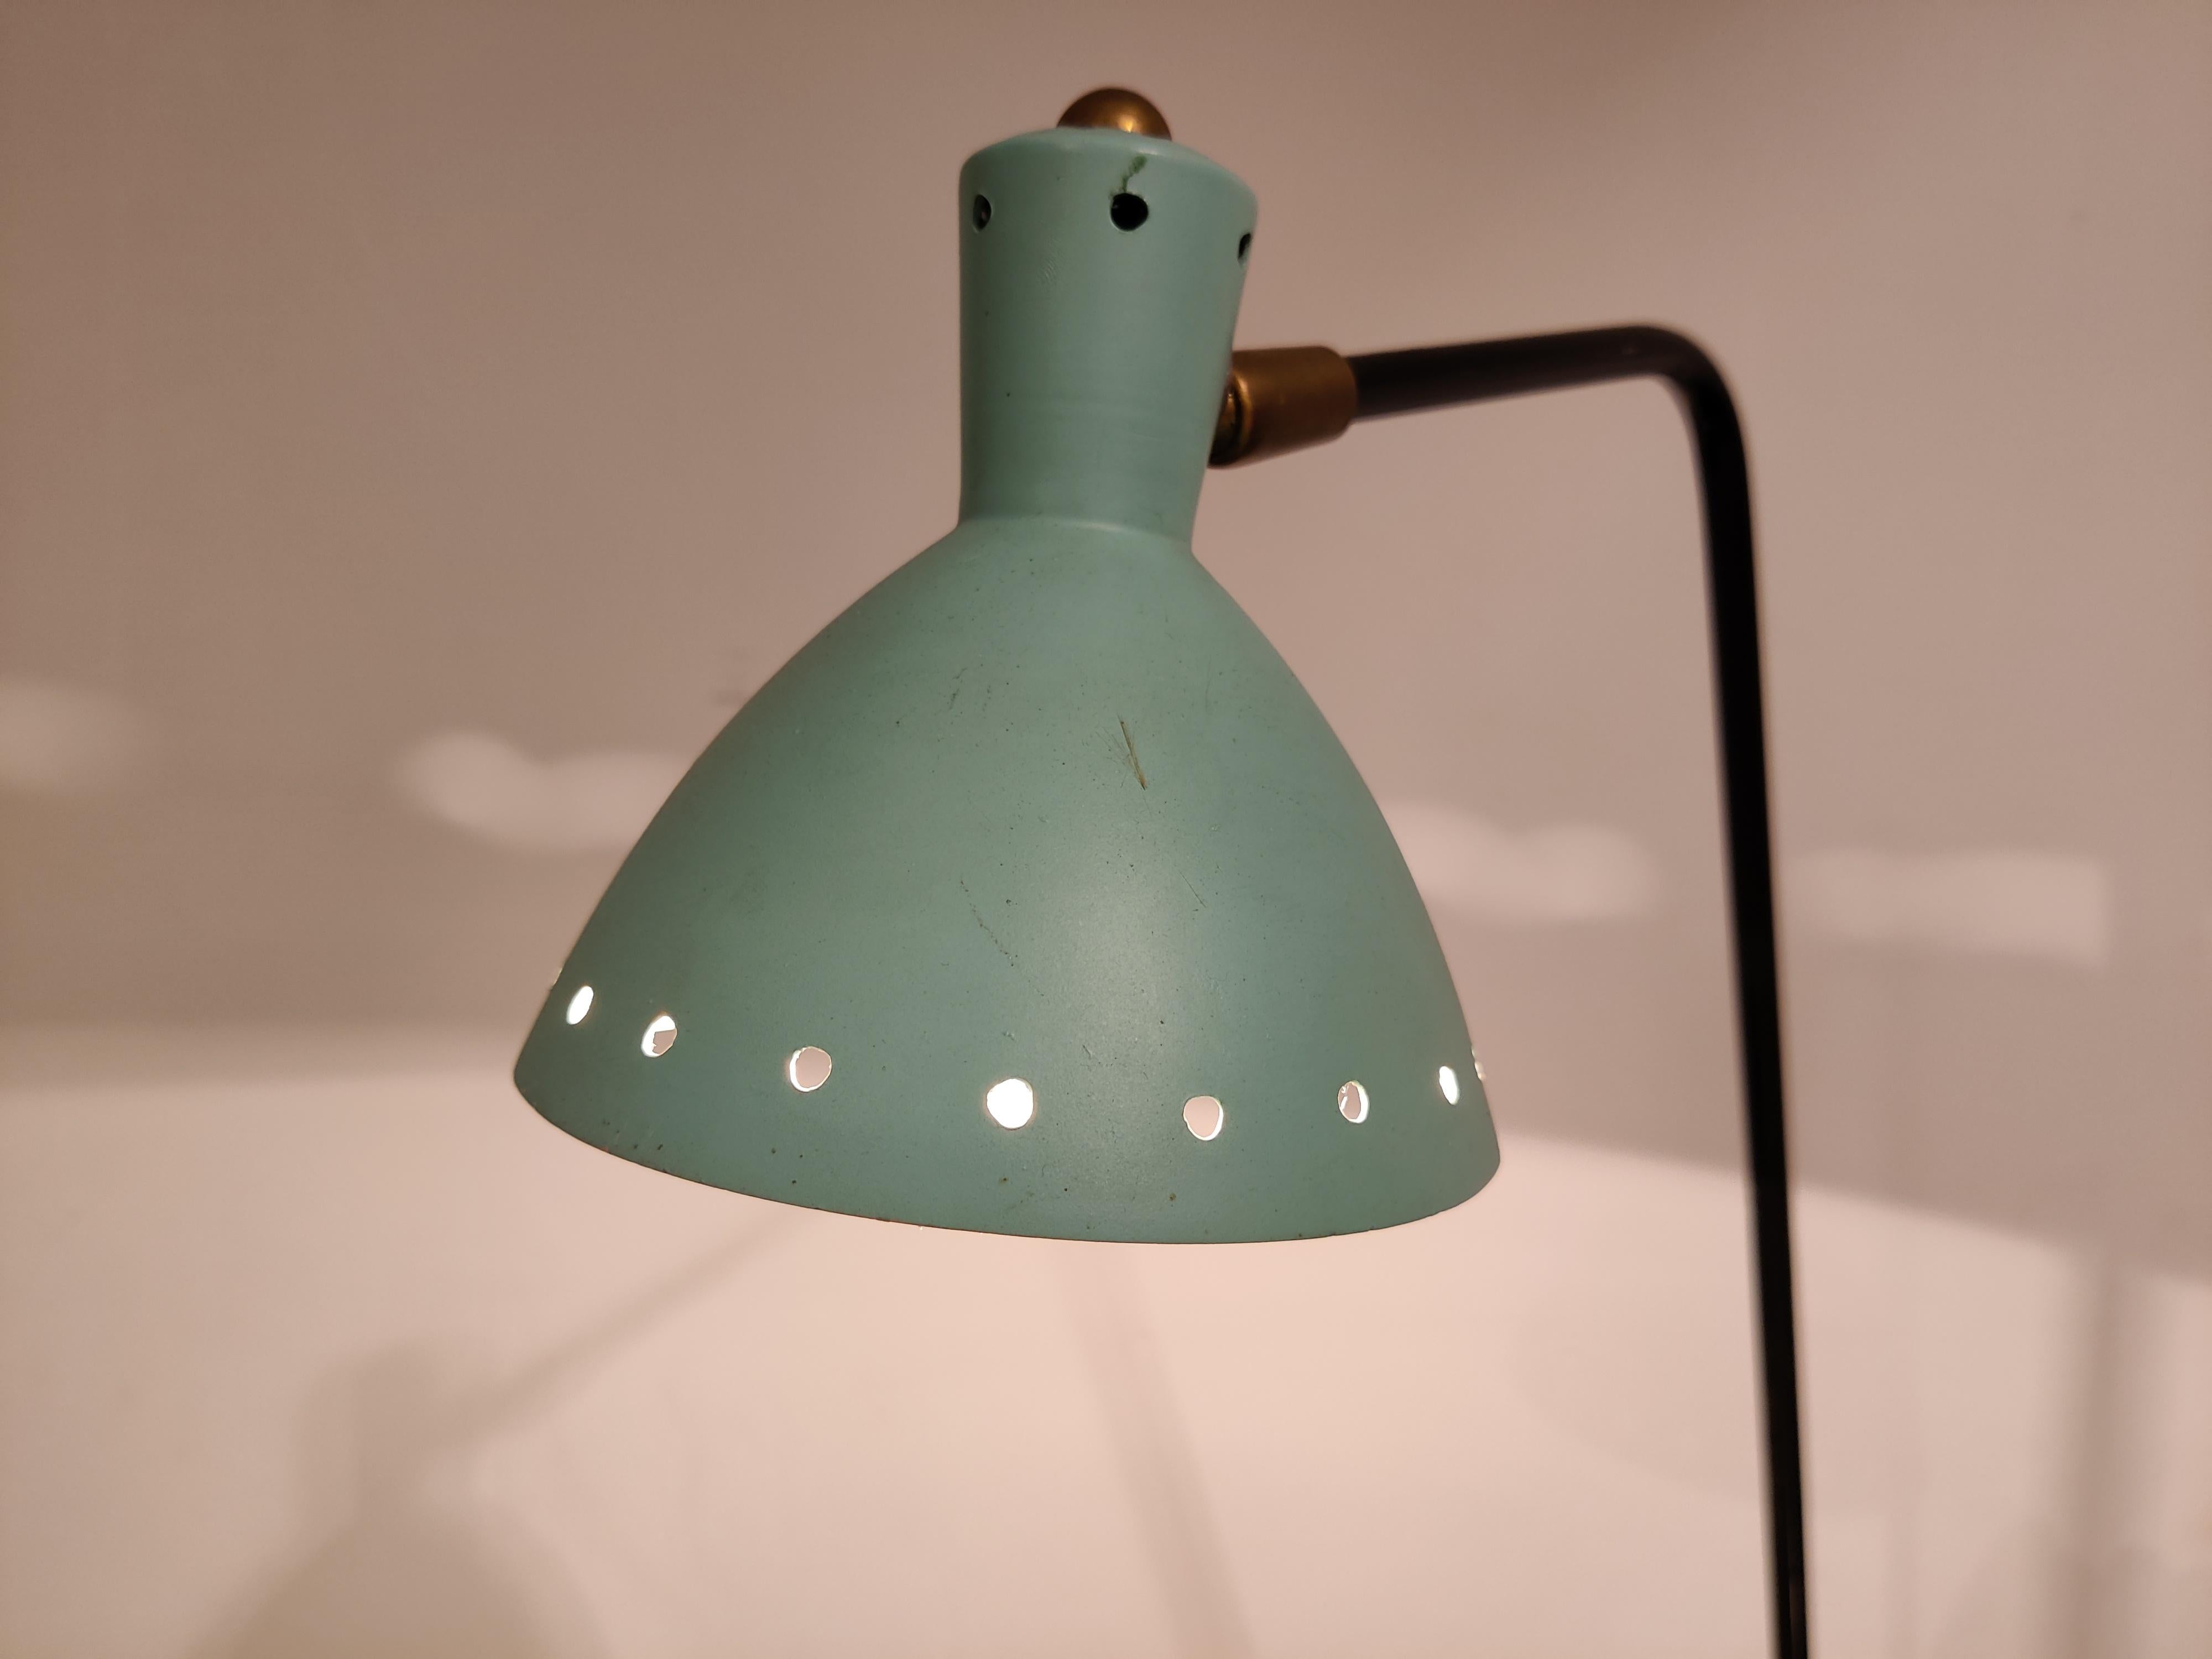 Elegant mid century desk lamp with a metal and brass tripod base and a perforated aluminum green/blue lamp shade.

The lamp shade is articulated so you can position it in various ways. 

1950s - Italy

Works with a regular E14 light